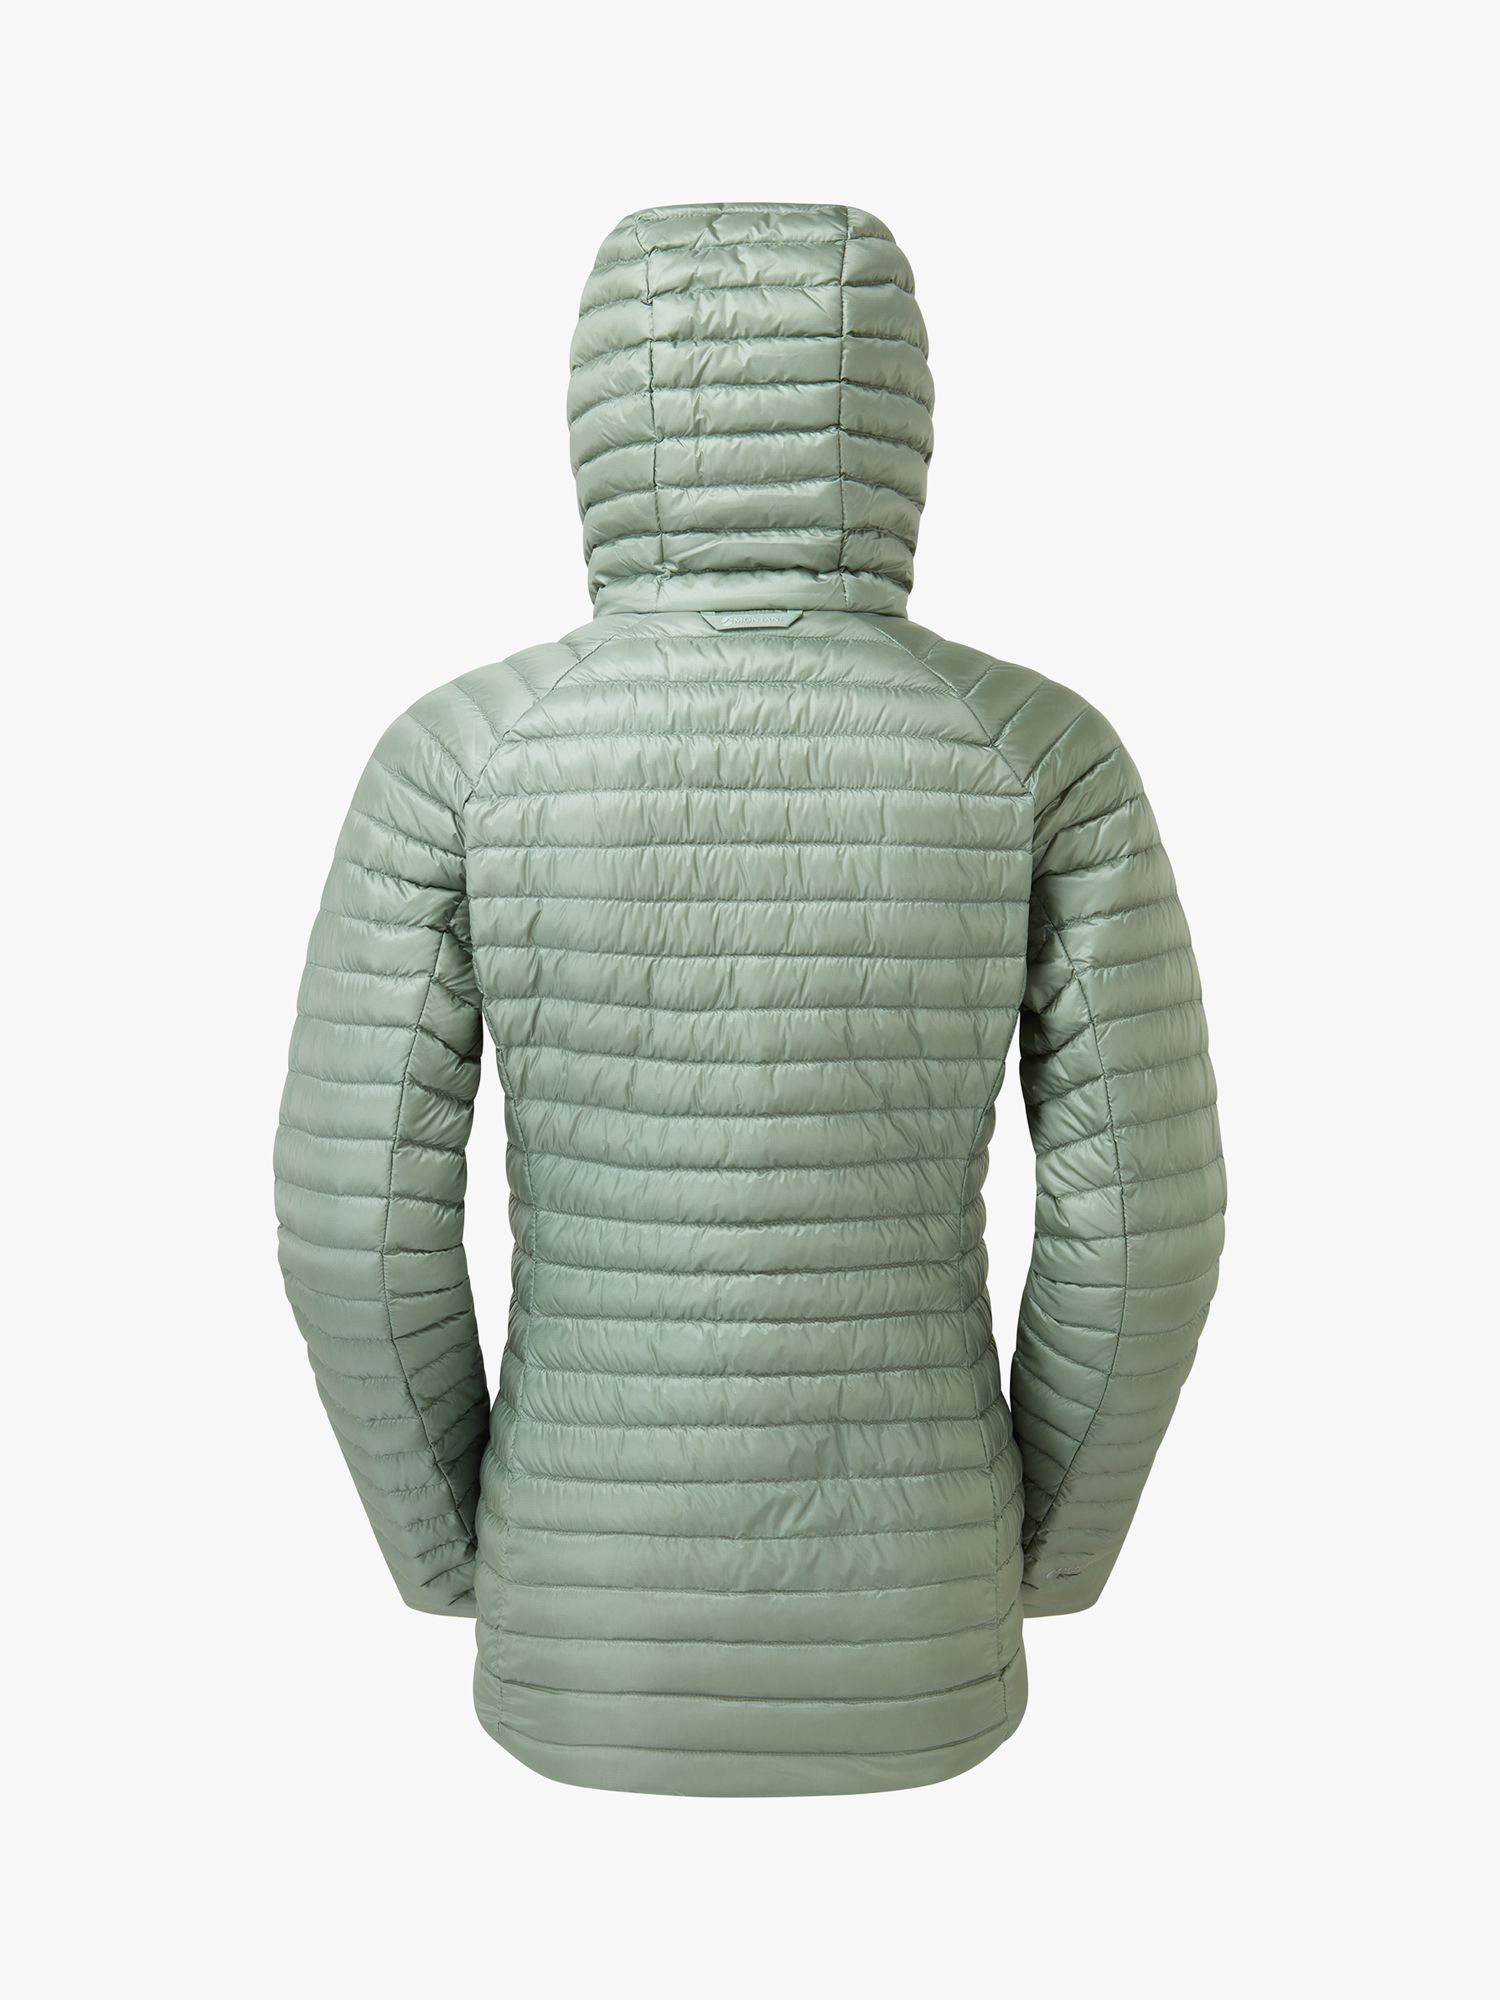 Buy Montane Anti-Freeze Lite Women's Recycled Packable Down Jacket Online at johnlewis.com